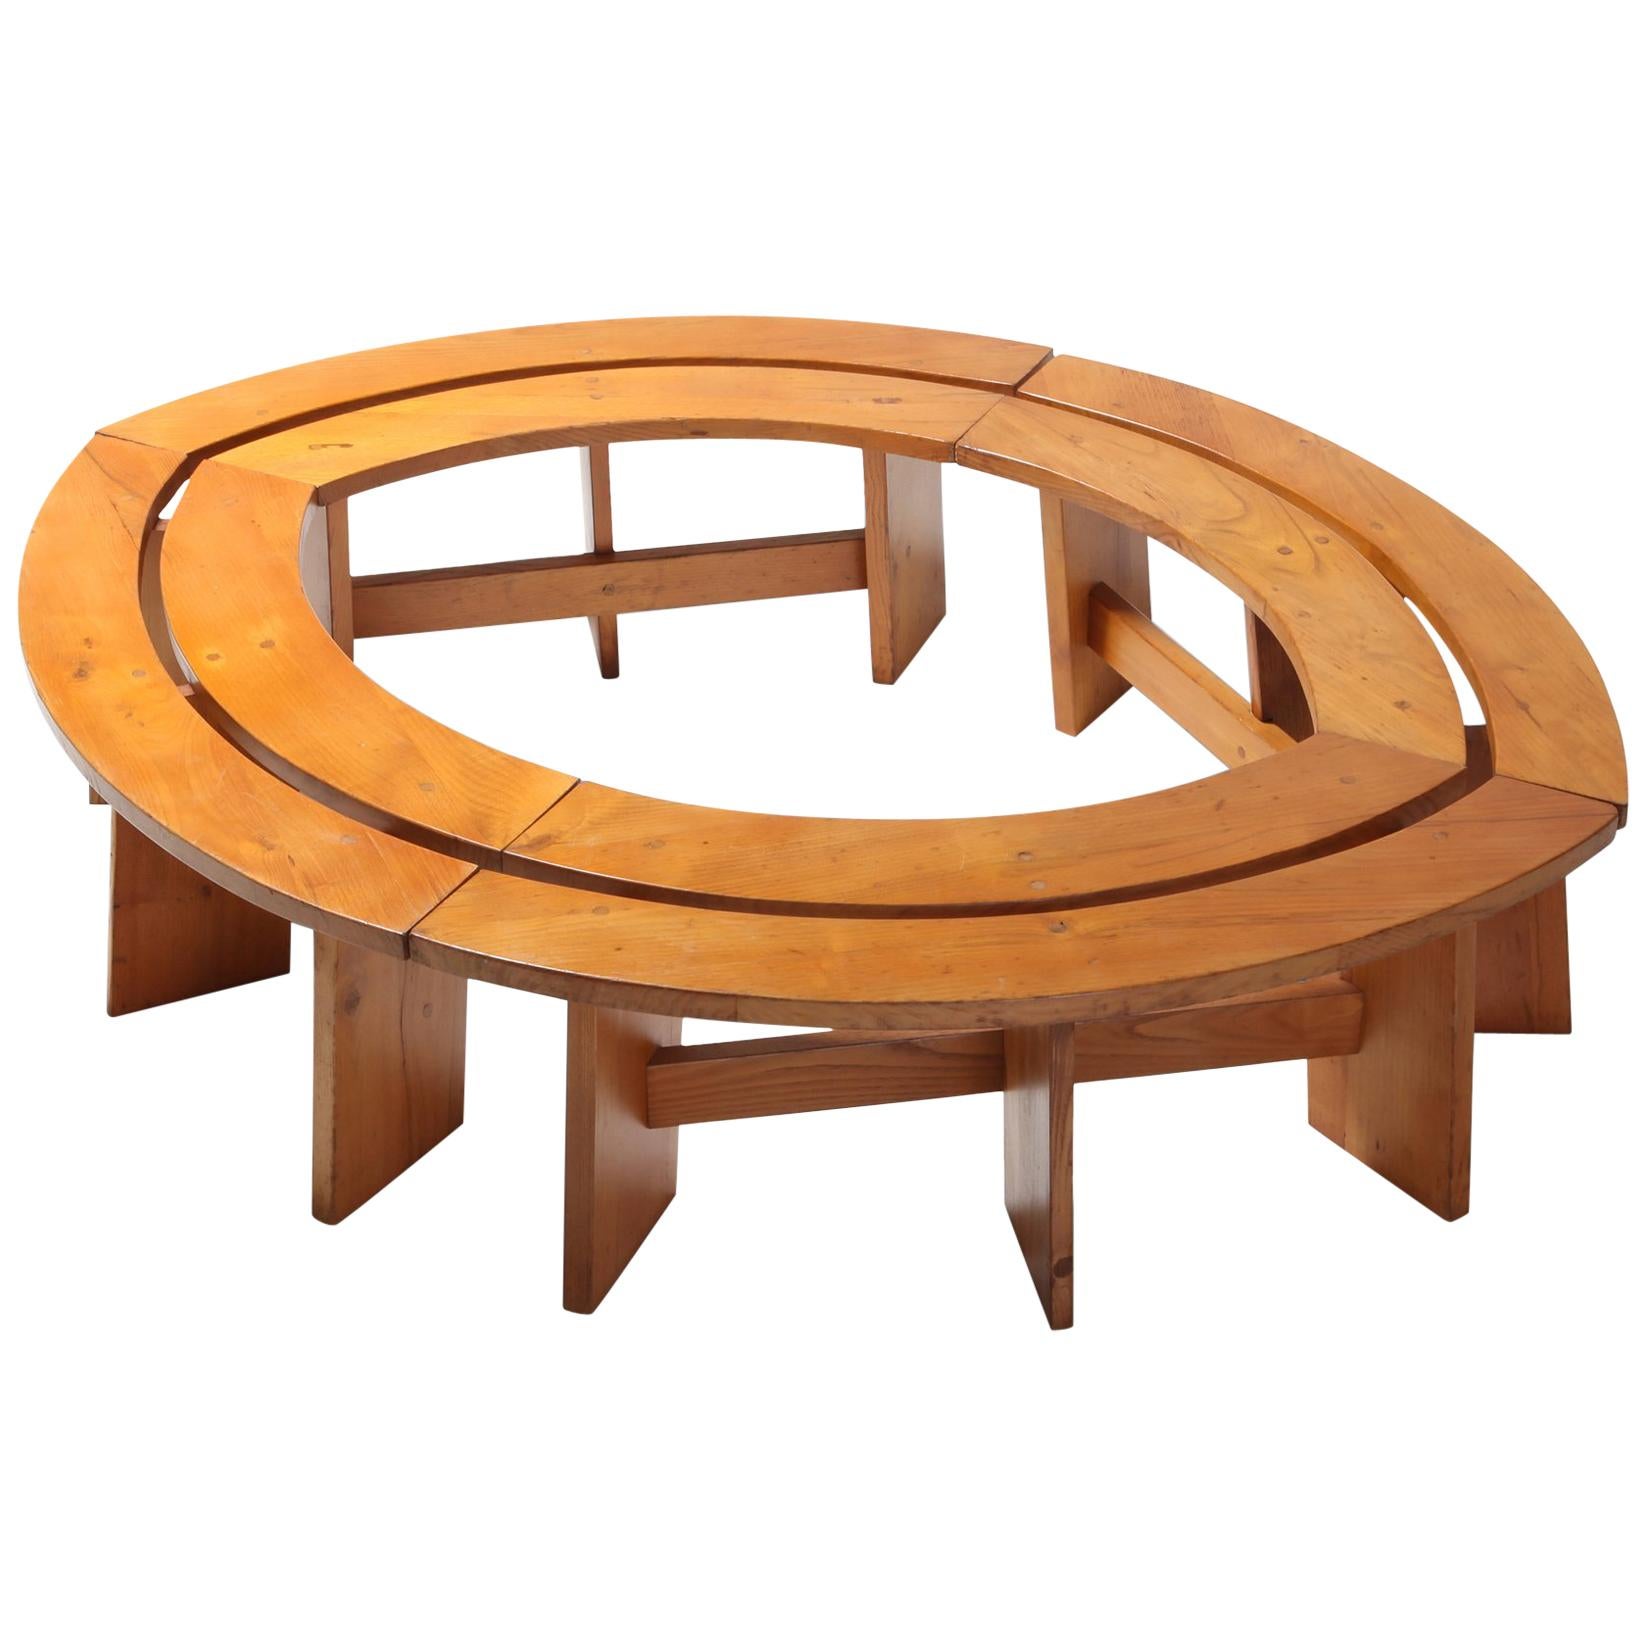 Set of four benches in extinct French elm, Pierre Chapo, 1970s

These benches are another great example of the quality and craftsmanship of Pierre Chapo

France, 1960s.

Measures: One piece: H 46 cm, D 46 cm, W 129 cm.
 